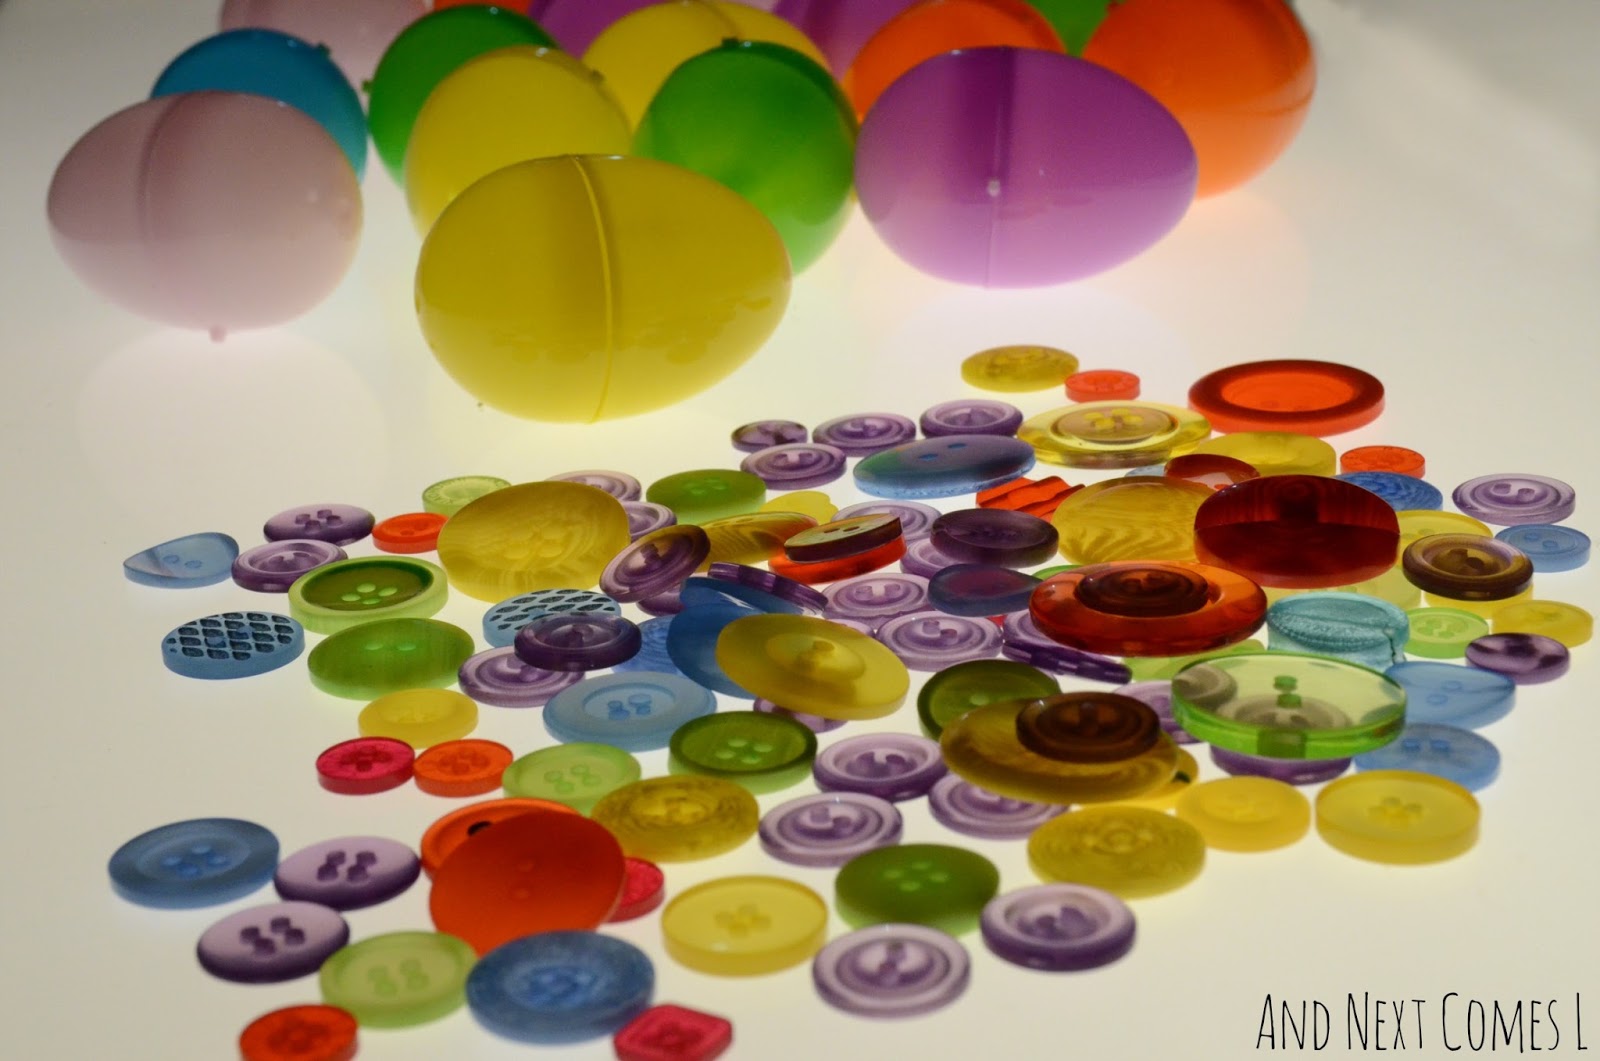 Plastic eggs and buttons on the light table